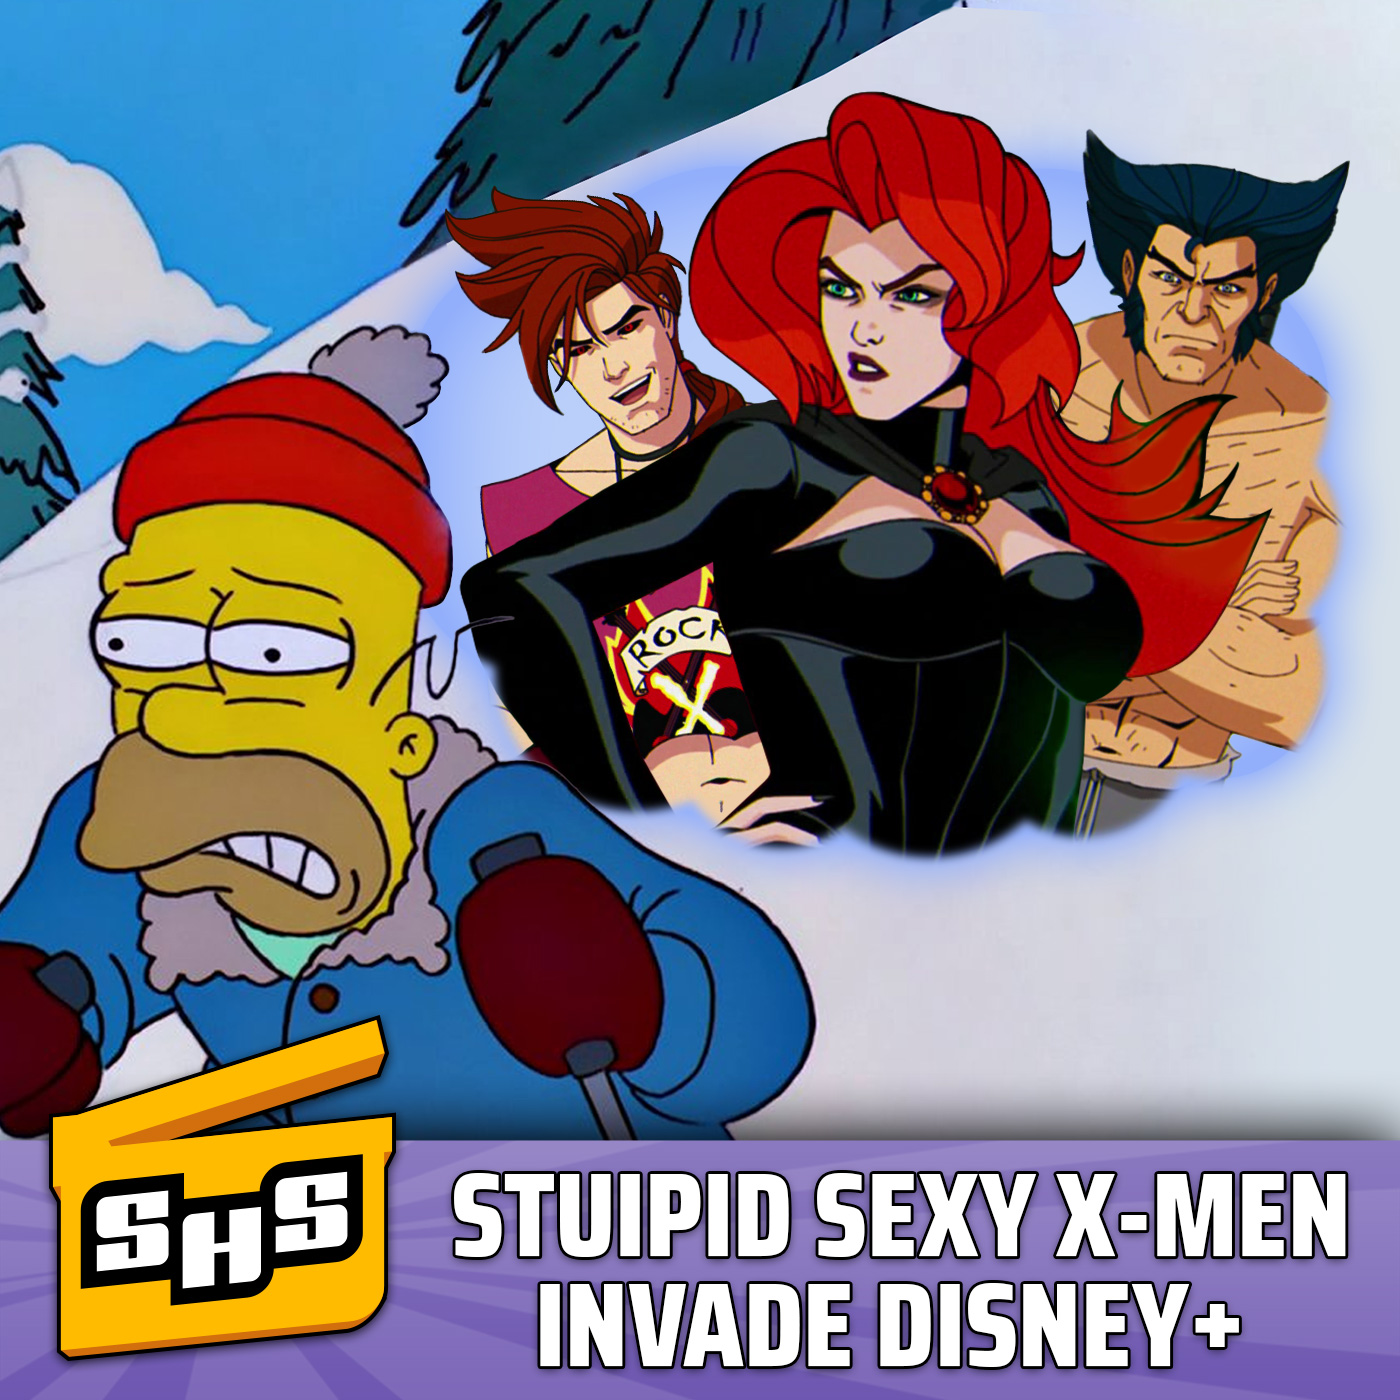 Stupid Sexy X-men 97, Marvel Rivals Trailer, Spider-verse Into Mental Health Short, and more!